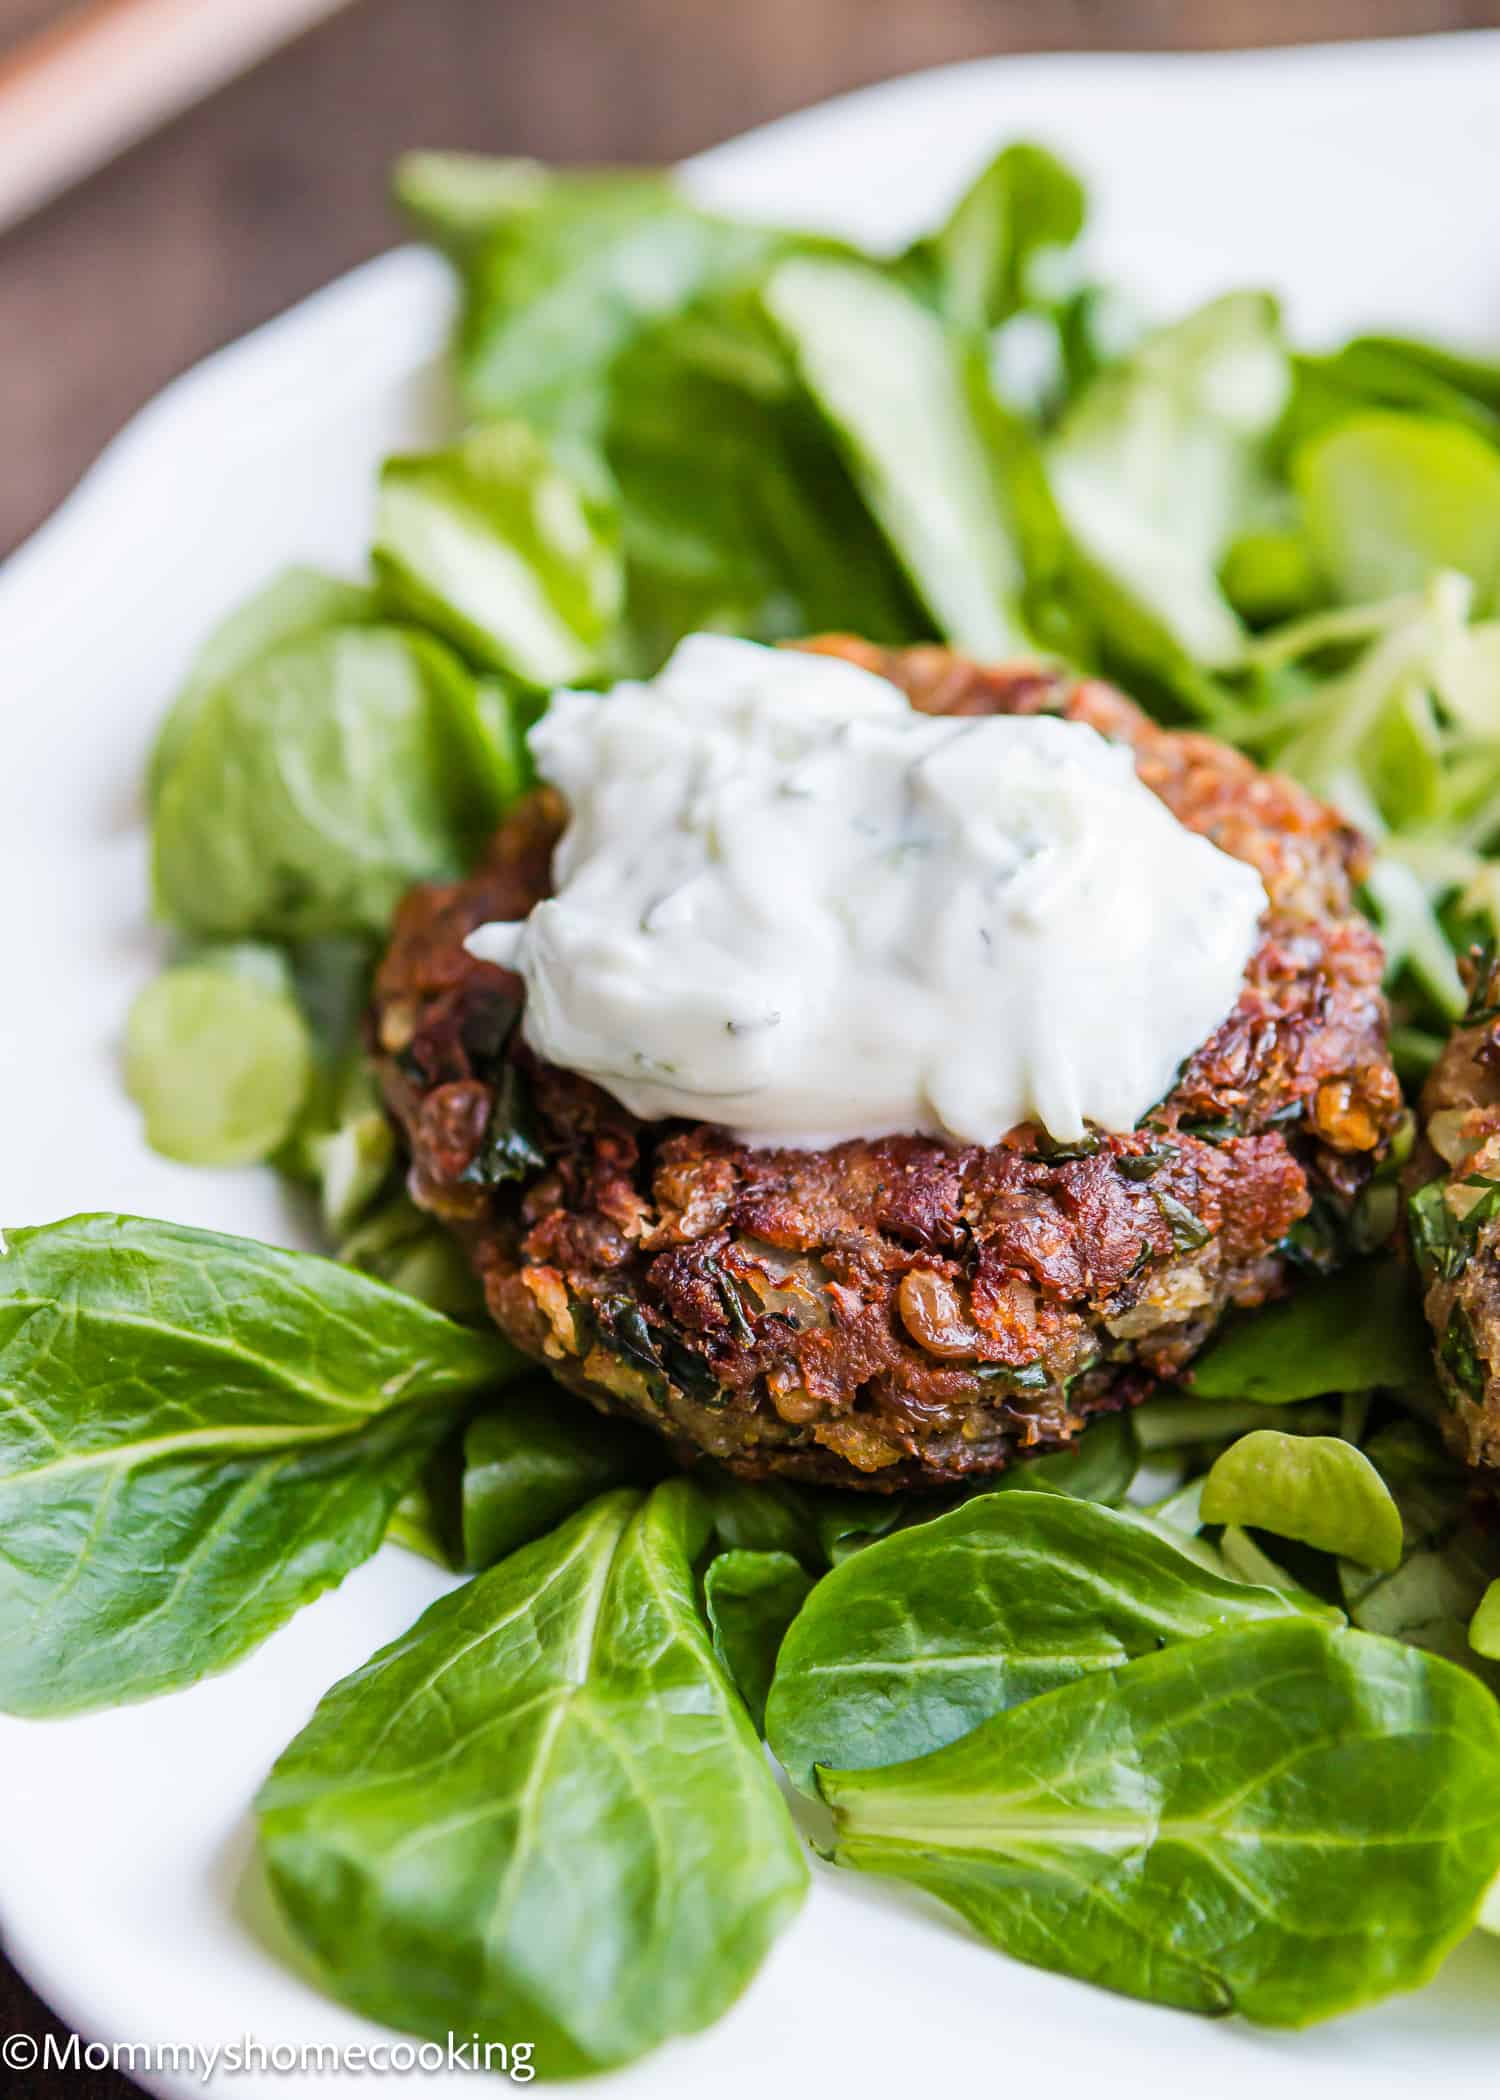 Healthy Easy Lentil Pattie with yogurt sauce on top over greens on a plate.